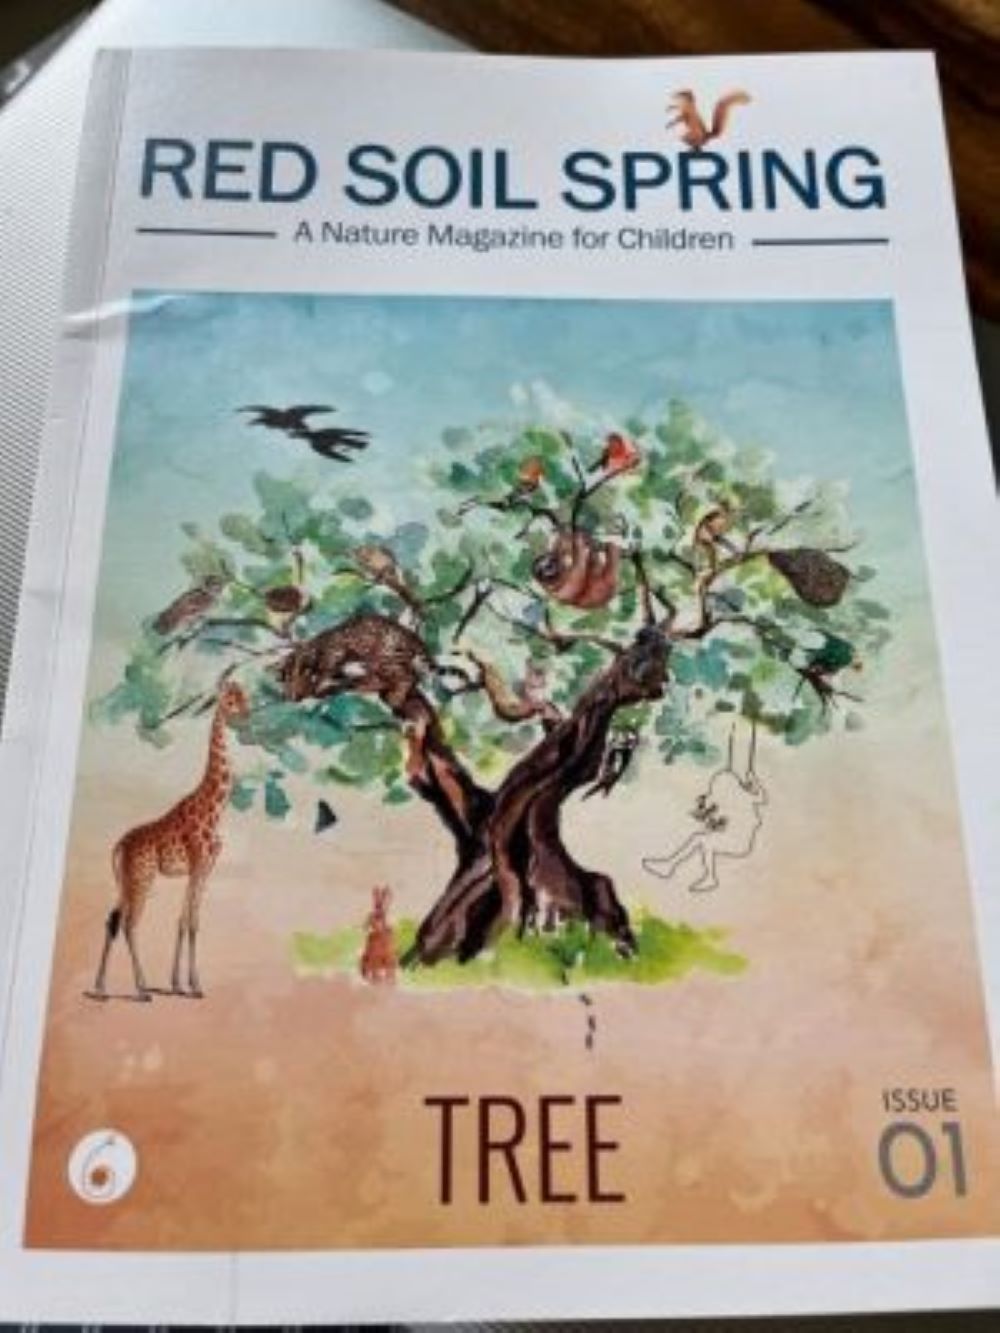 REVIEW: RED SOIL SPRING – A Nature magazine for children